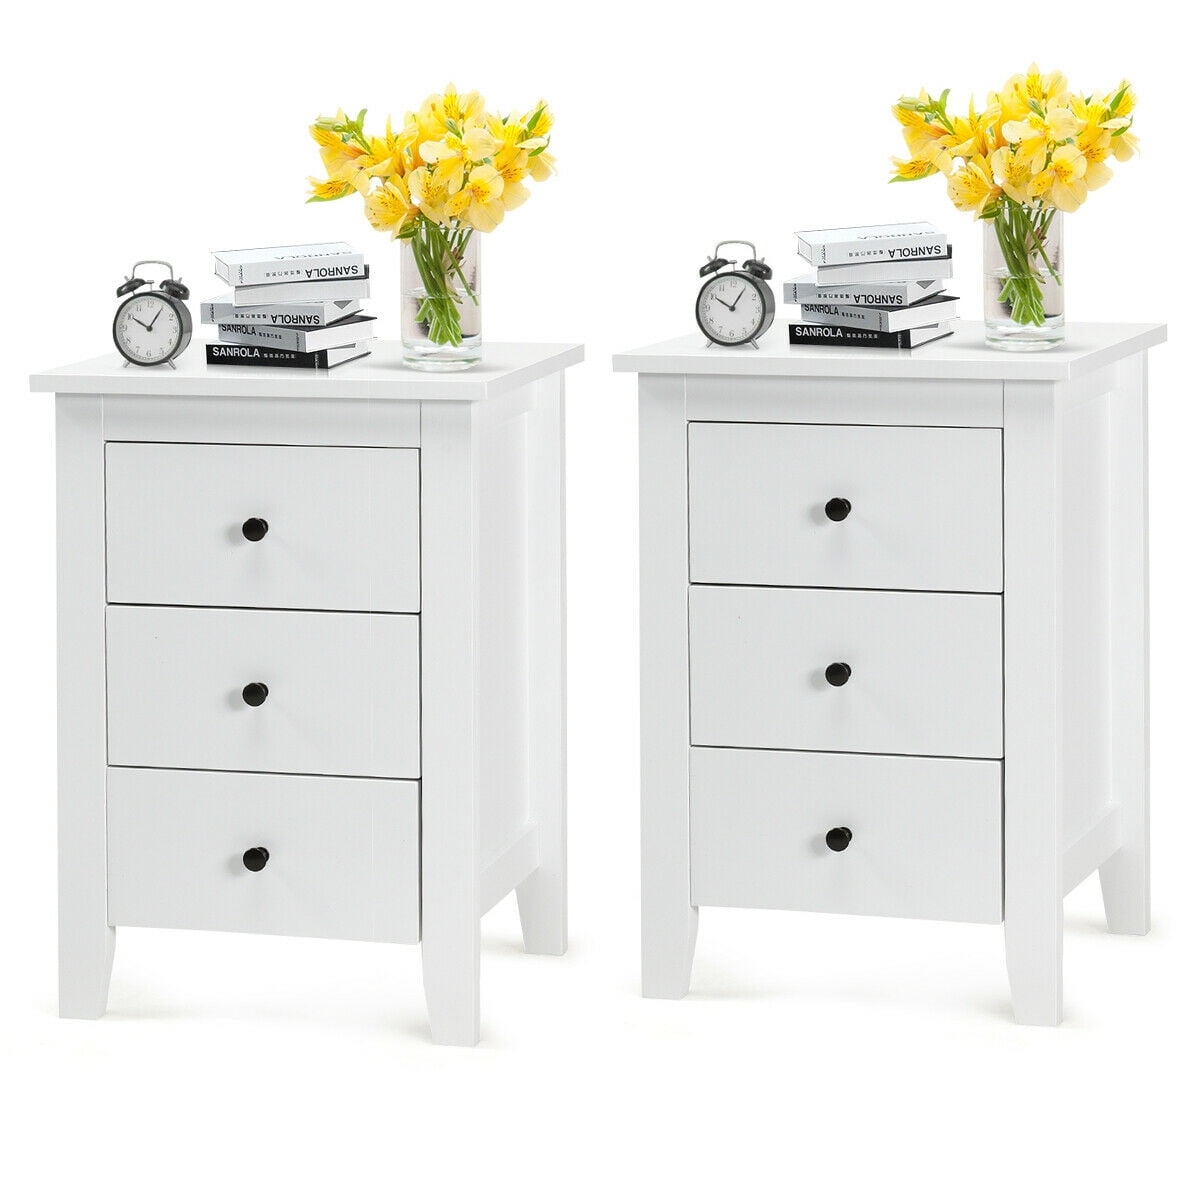 Details about   Nightstand Bedside End Table Bedroom Side Stand Modern Storage Drawers 